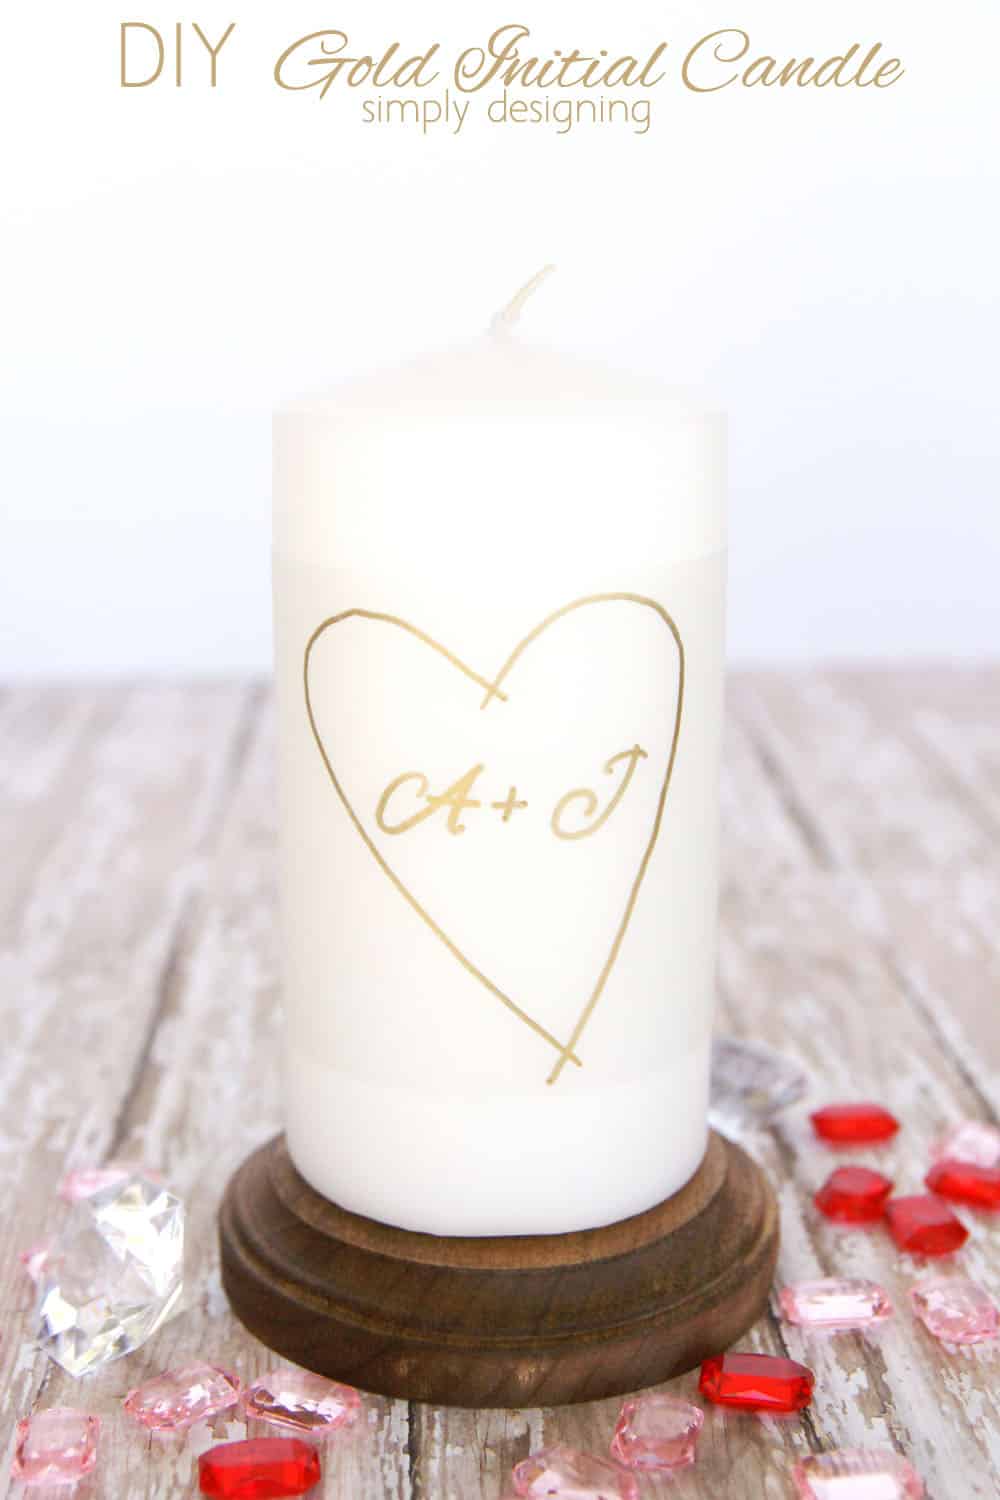 diy+gold+initial+candle+11 | DIY Gold Initial Candle | 25 | 5 Must-Have Tech Gifts